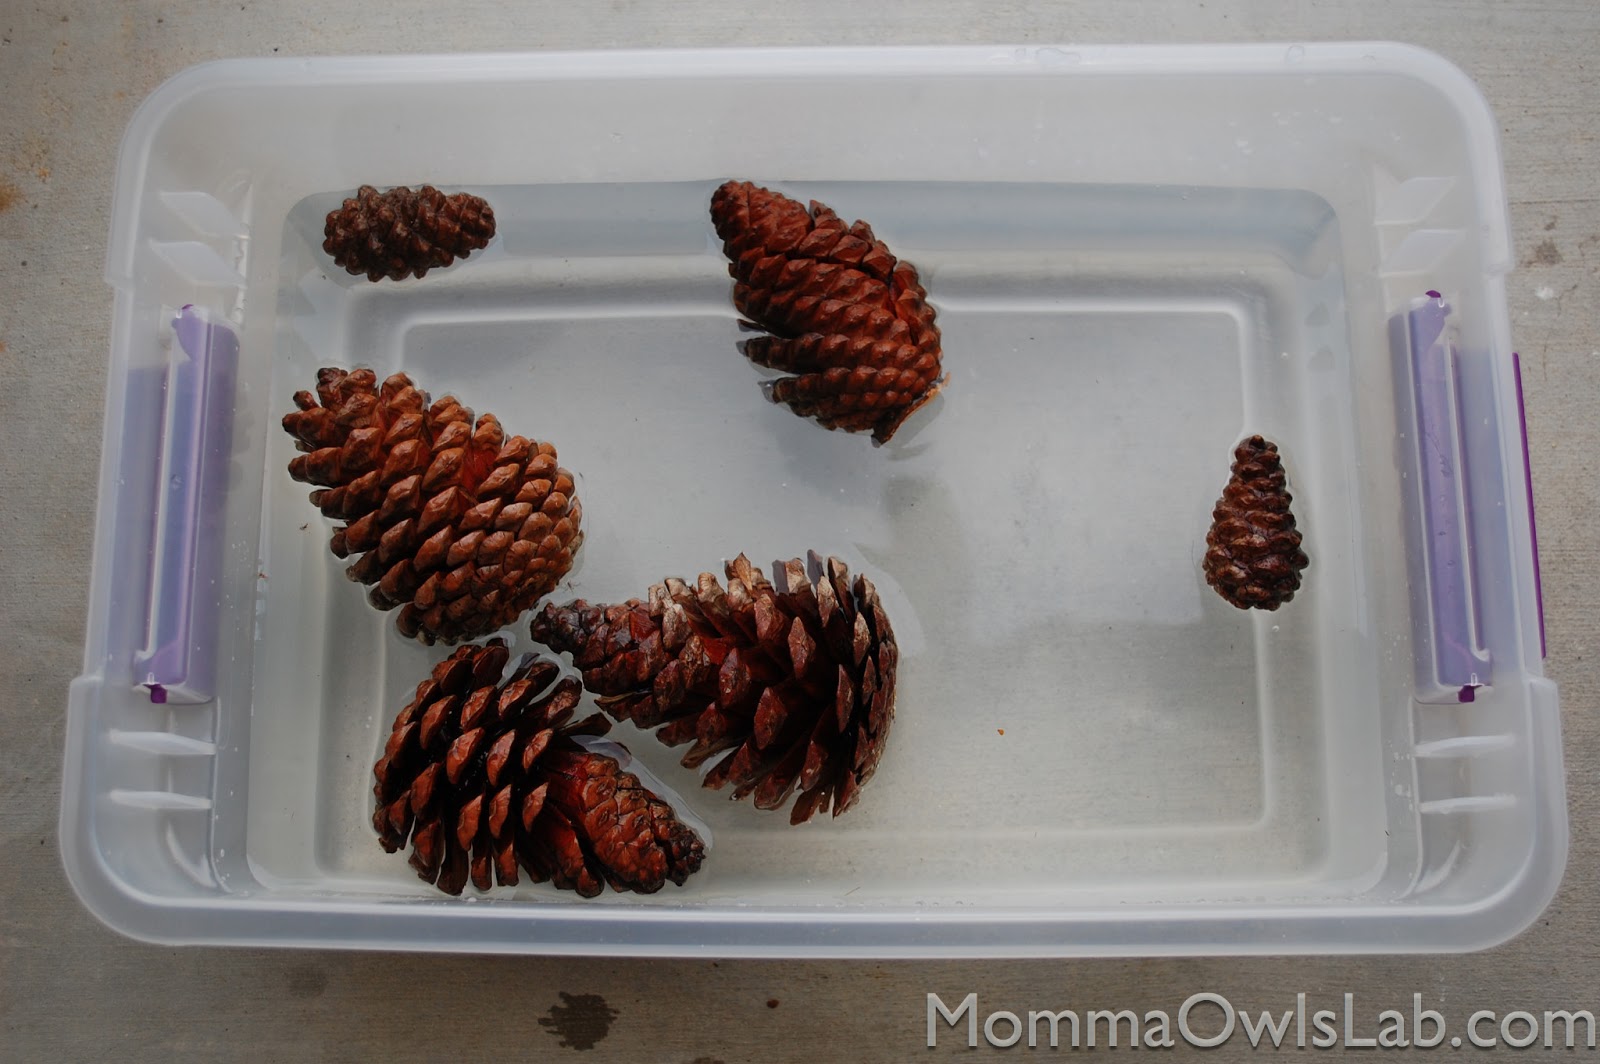 How to Make Pine Cones Pop :: Dry and Debug Pine Cones - An